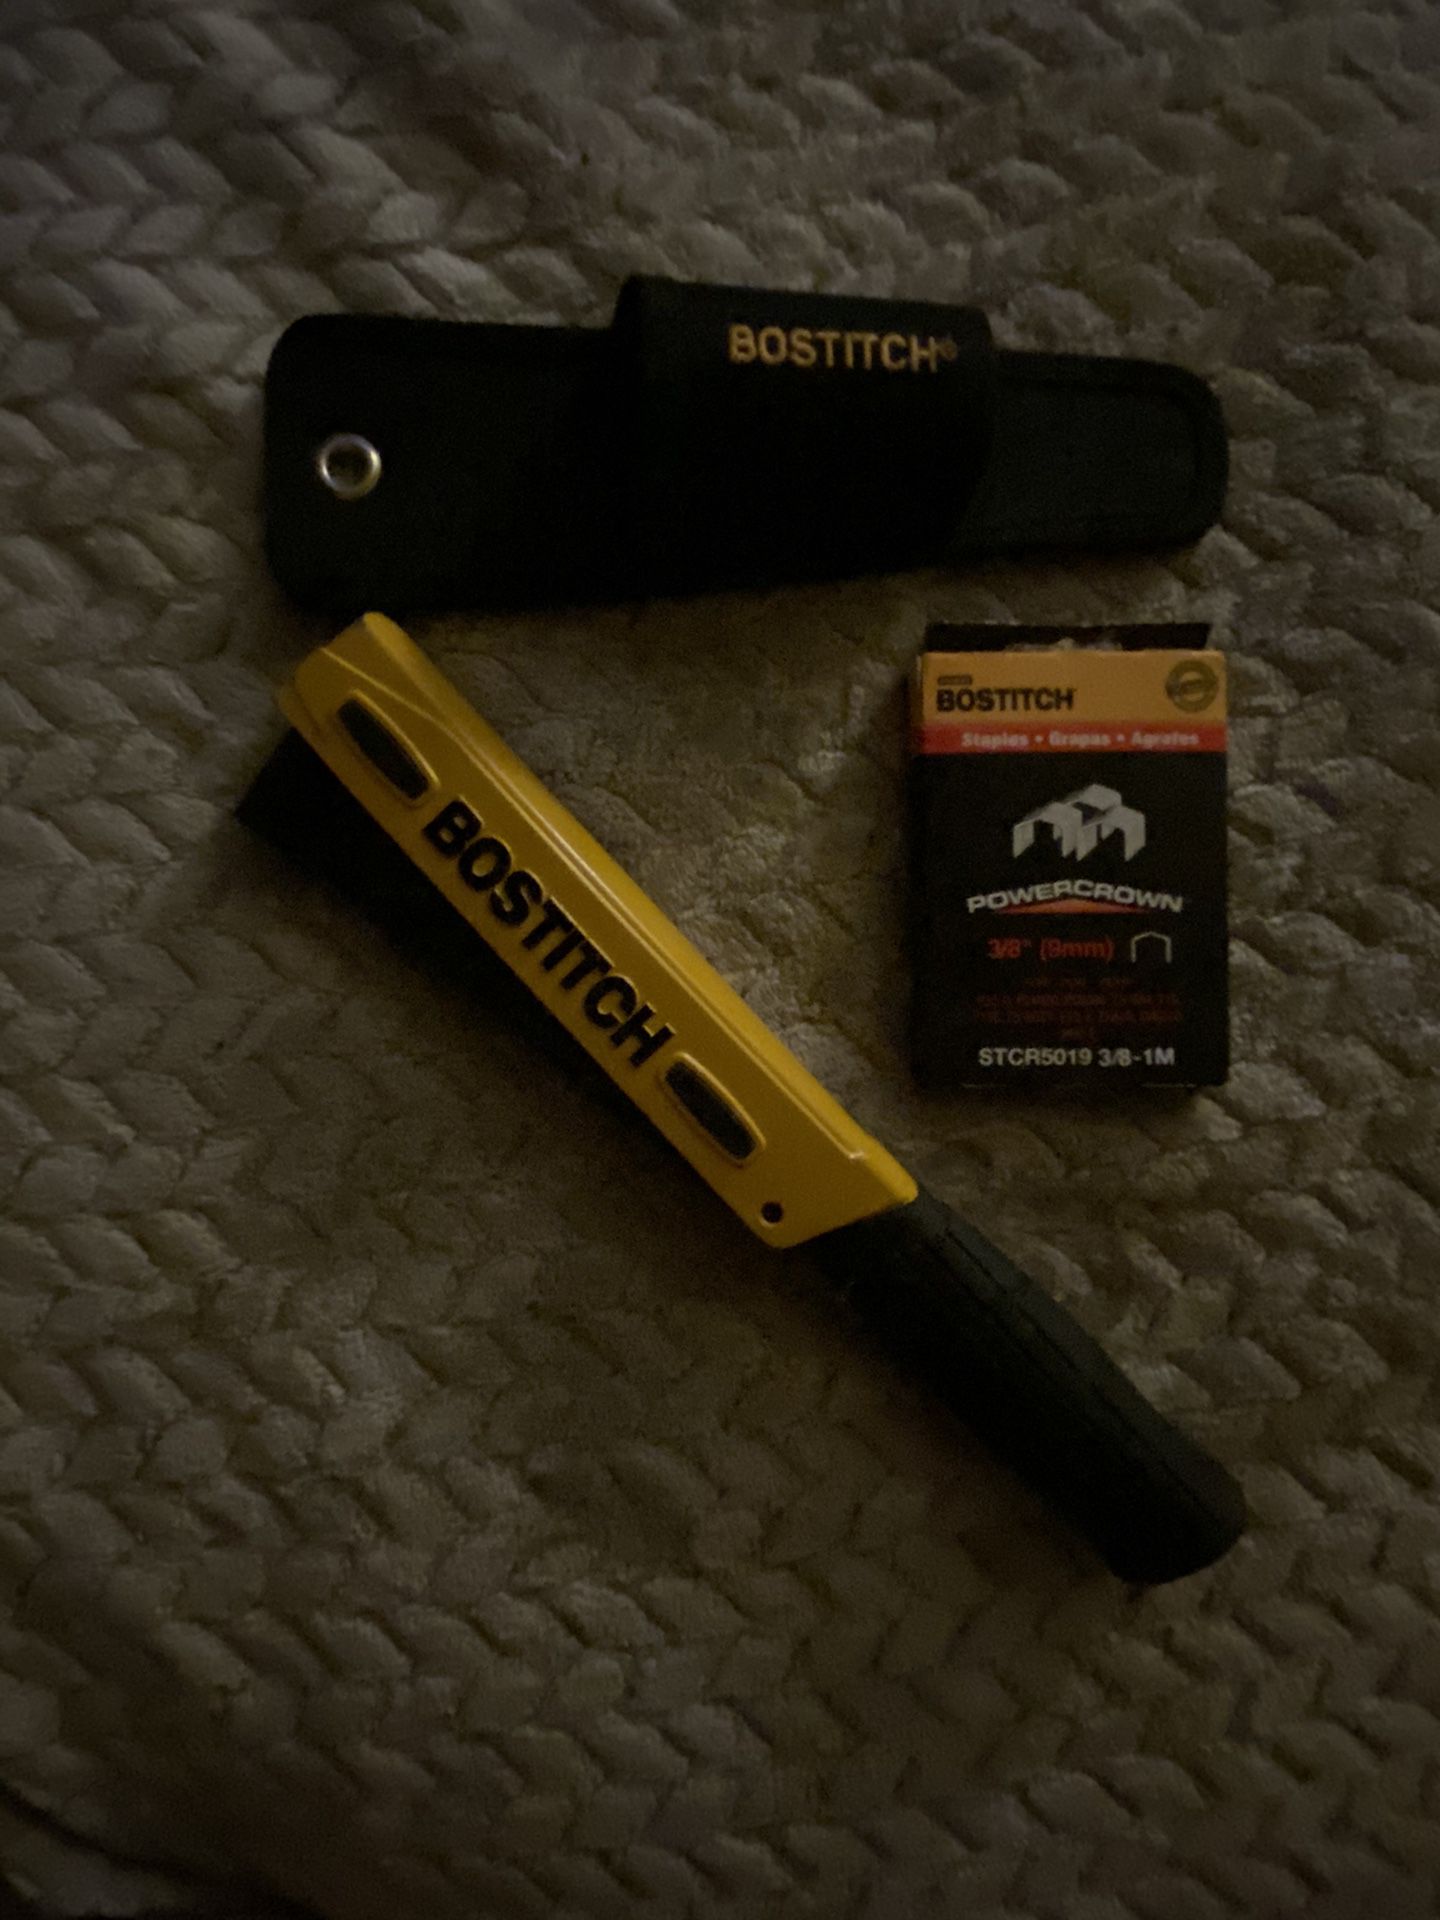 Bodtitch hammer stapler with holder and staples brand new just taken out package